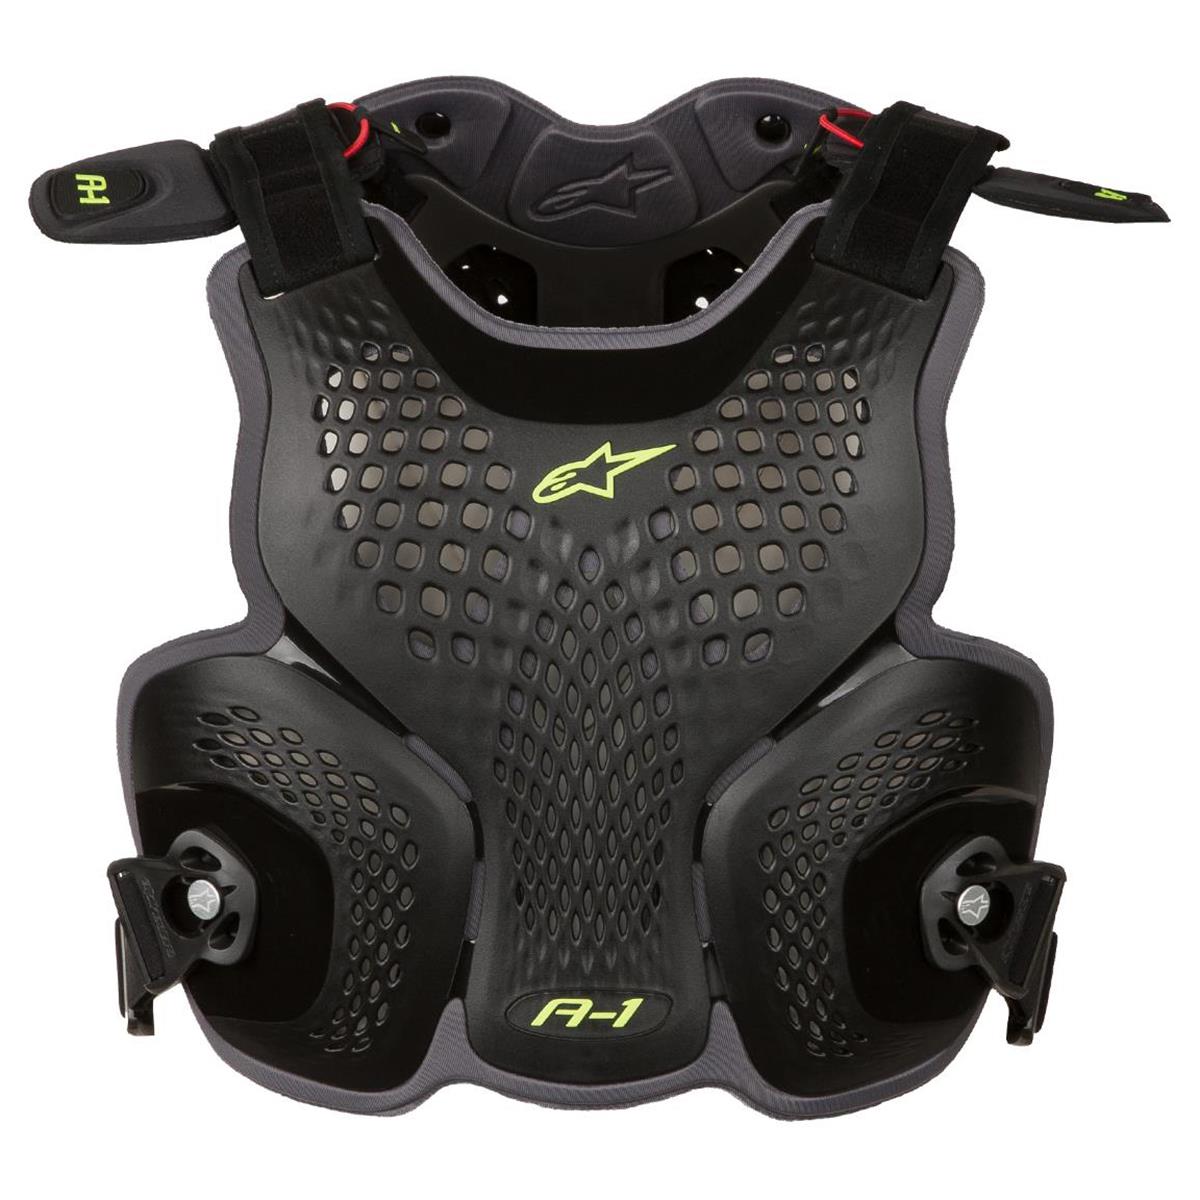 Alpinestars Chest Protector A-1 Black/Anthracite